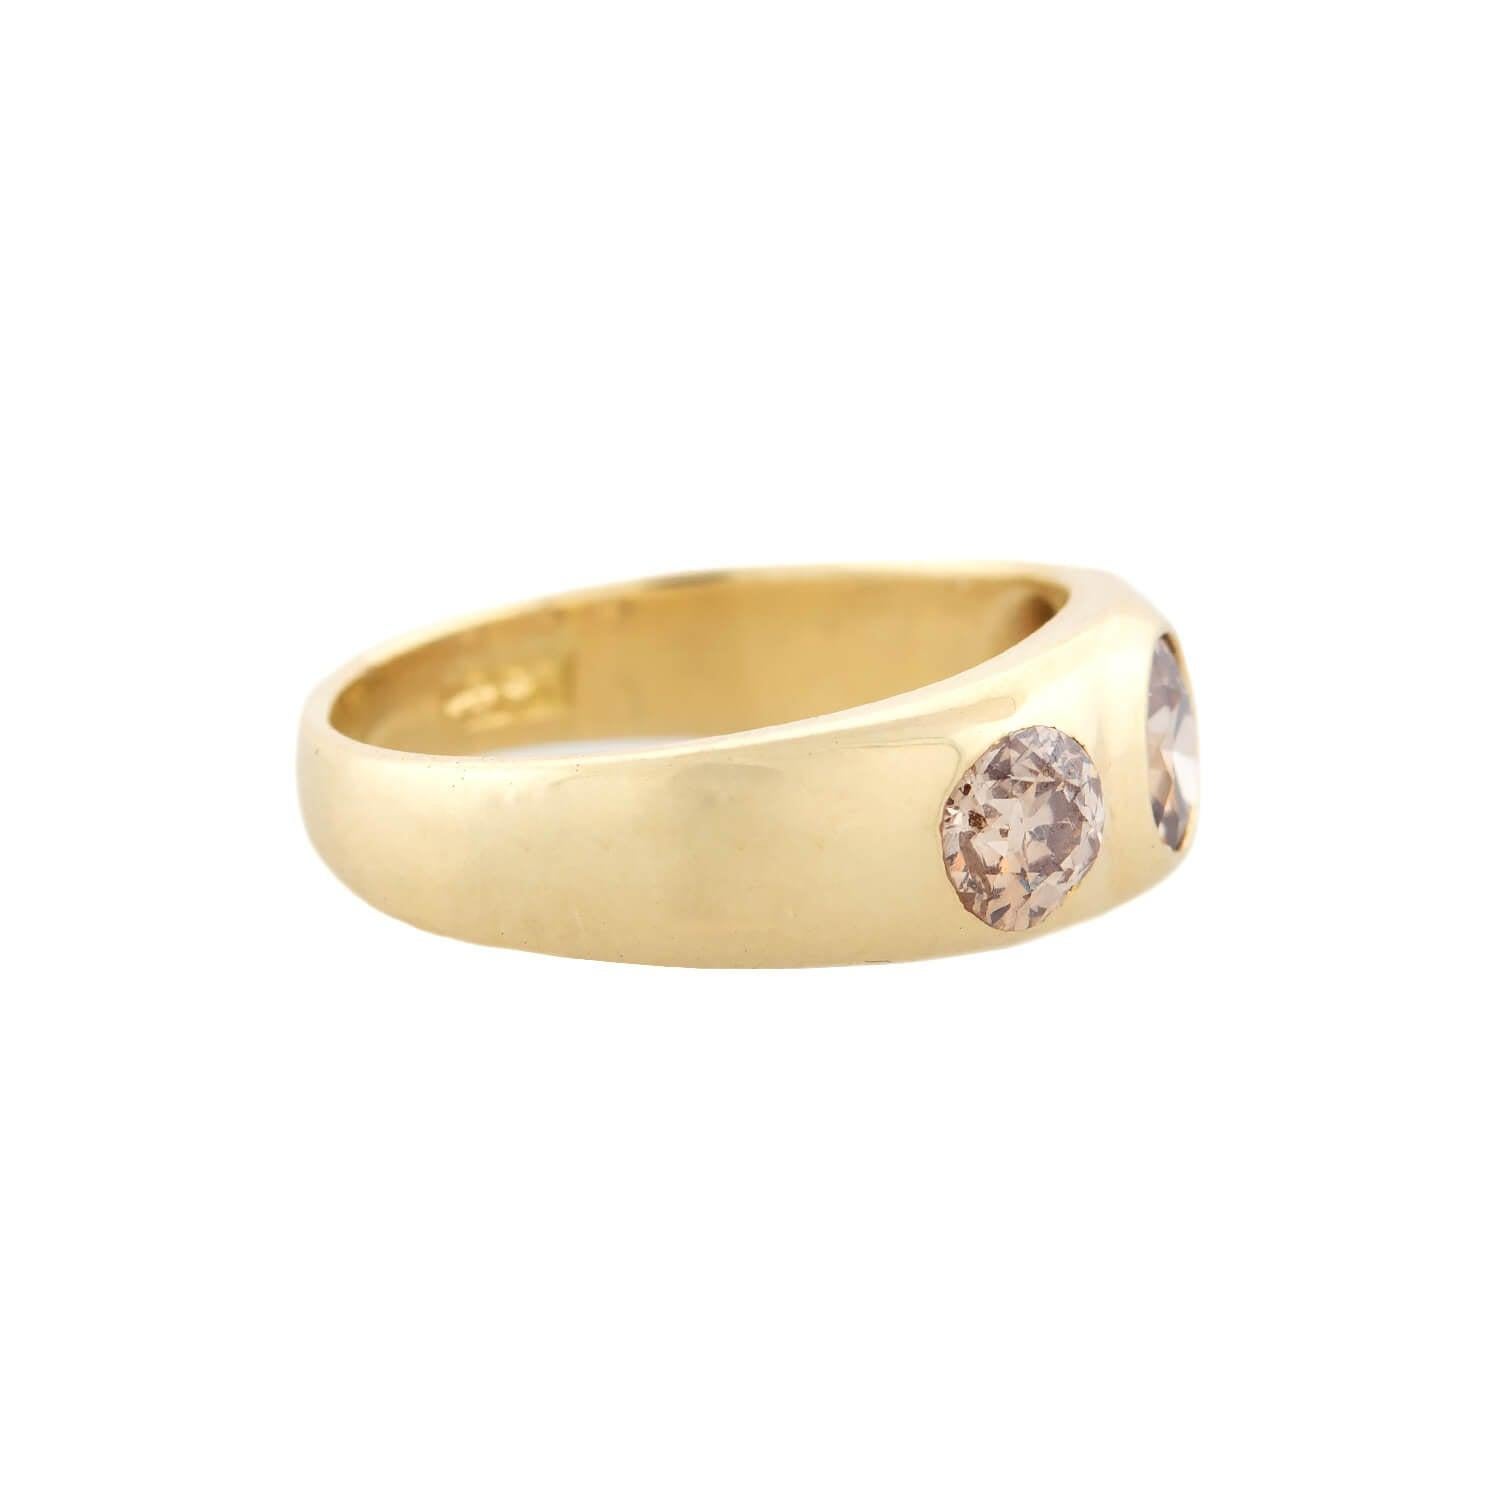 A gorgeous diamond gypsy ring from the Late Victorian (ca1900s) era! Crafted in 18kt yellow gold, this ring is set with three beautiful Old Mine Cut Diamonds in flush bezel settings. The diamonds weigh an approximate total of 1.75ctw and display an